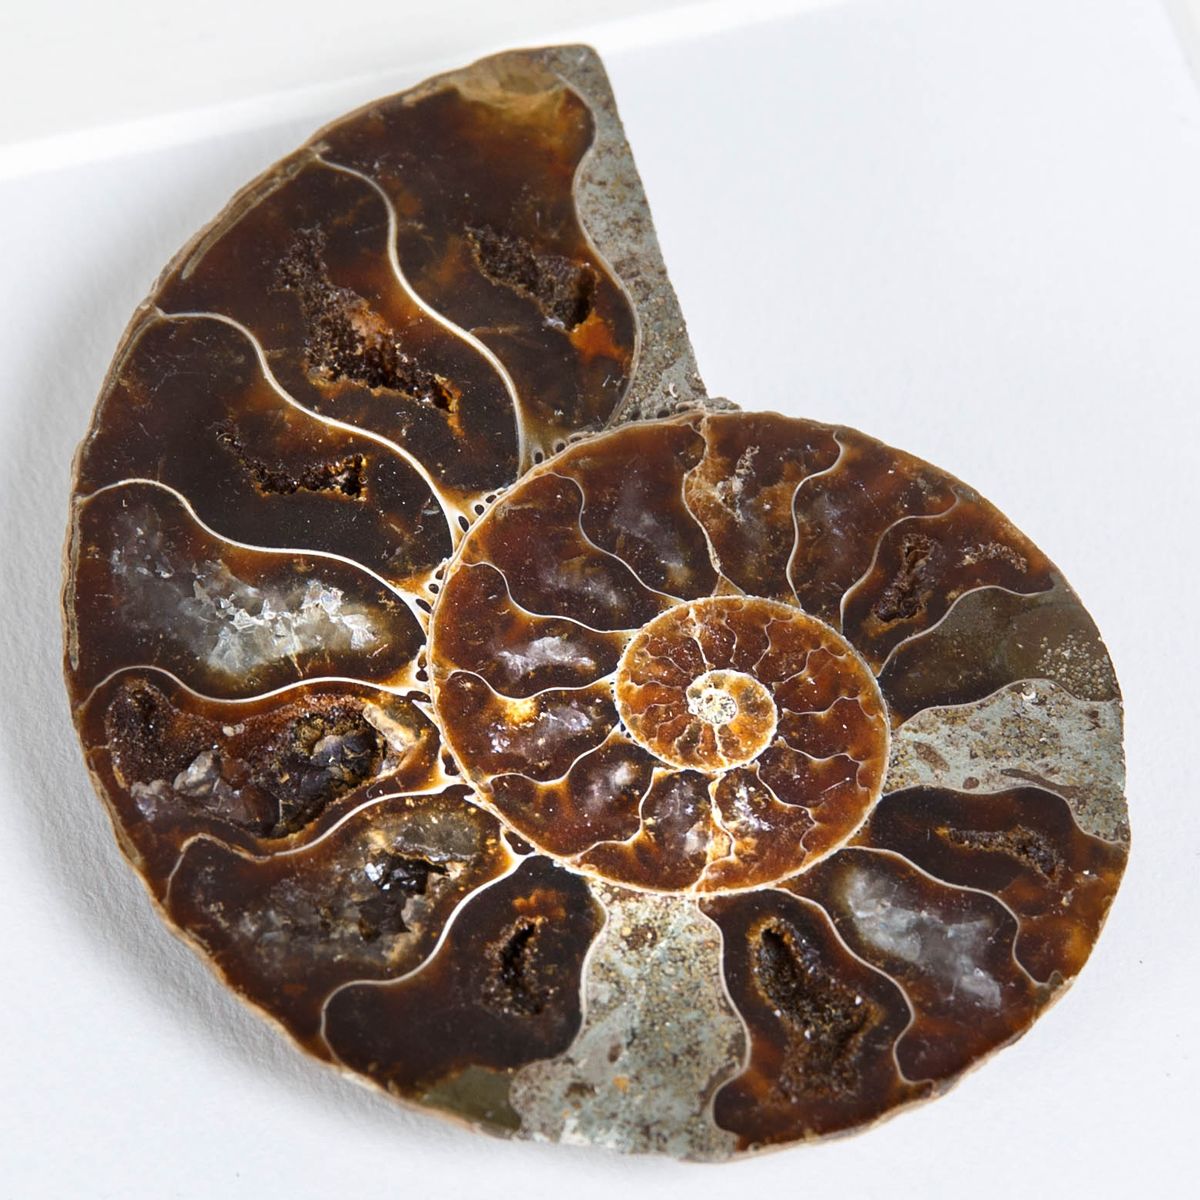 Cut and Polished Ammonite Fossil in Box Frame (Cleoniceras sp)